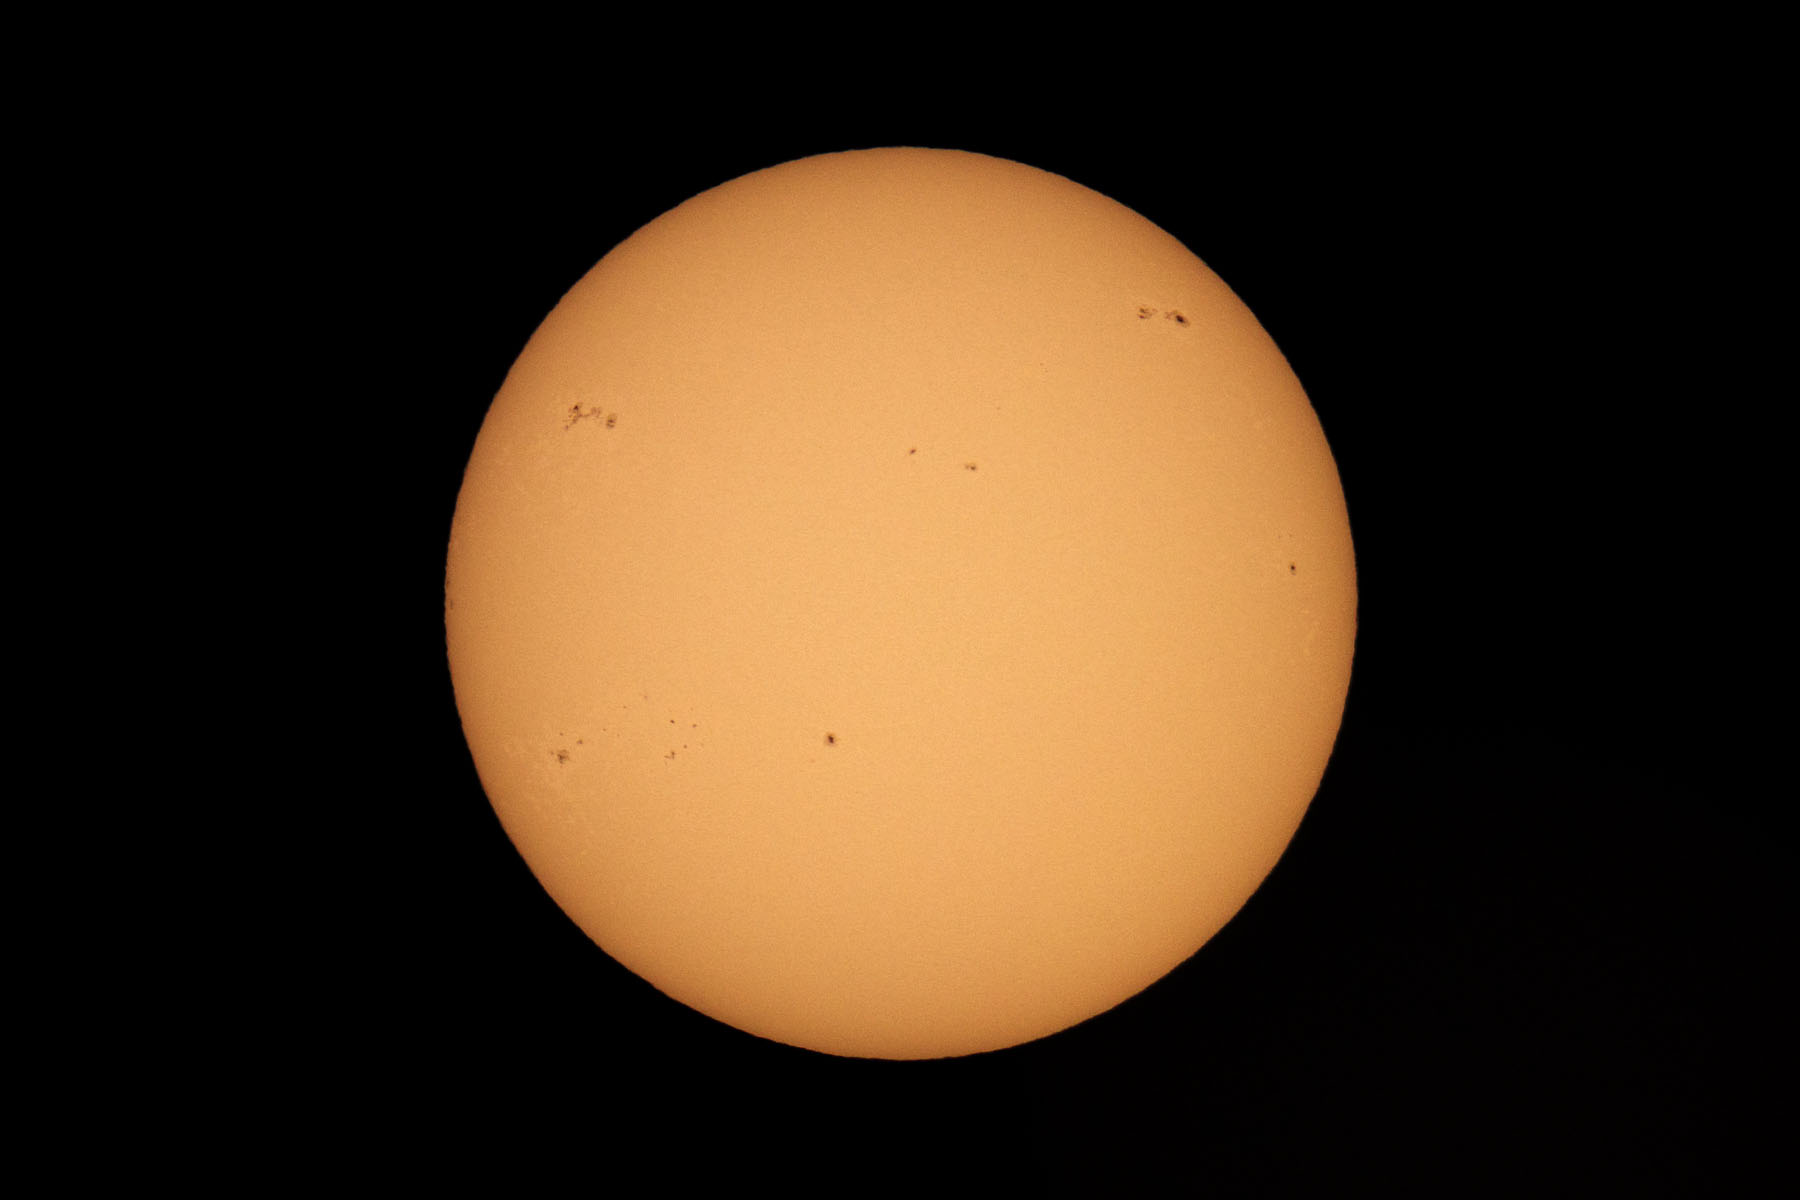 A week after the eclipse, the moon is gone and there are more sunspots.  Shot through Televue telescope with M100 camera, prime focus.  Click for next photo.